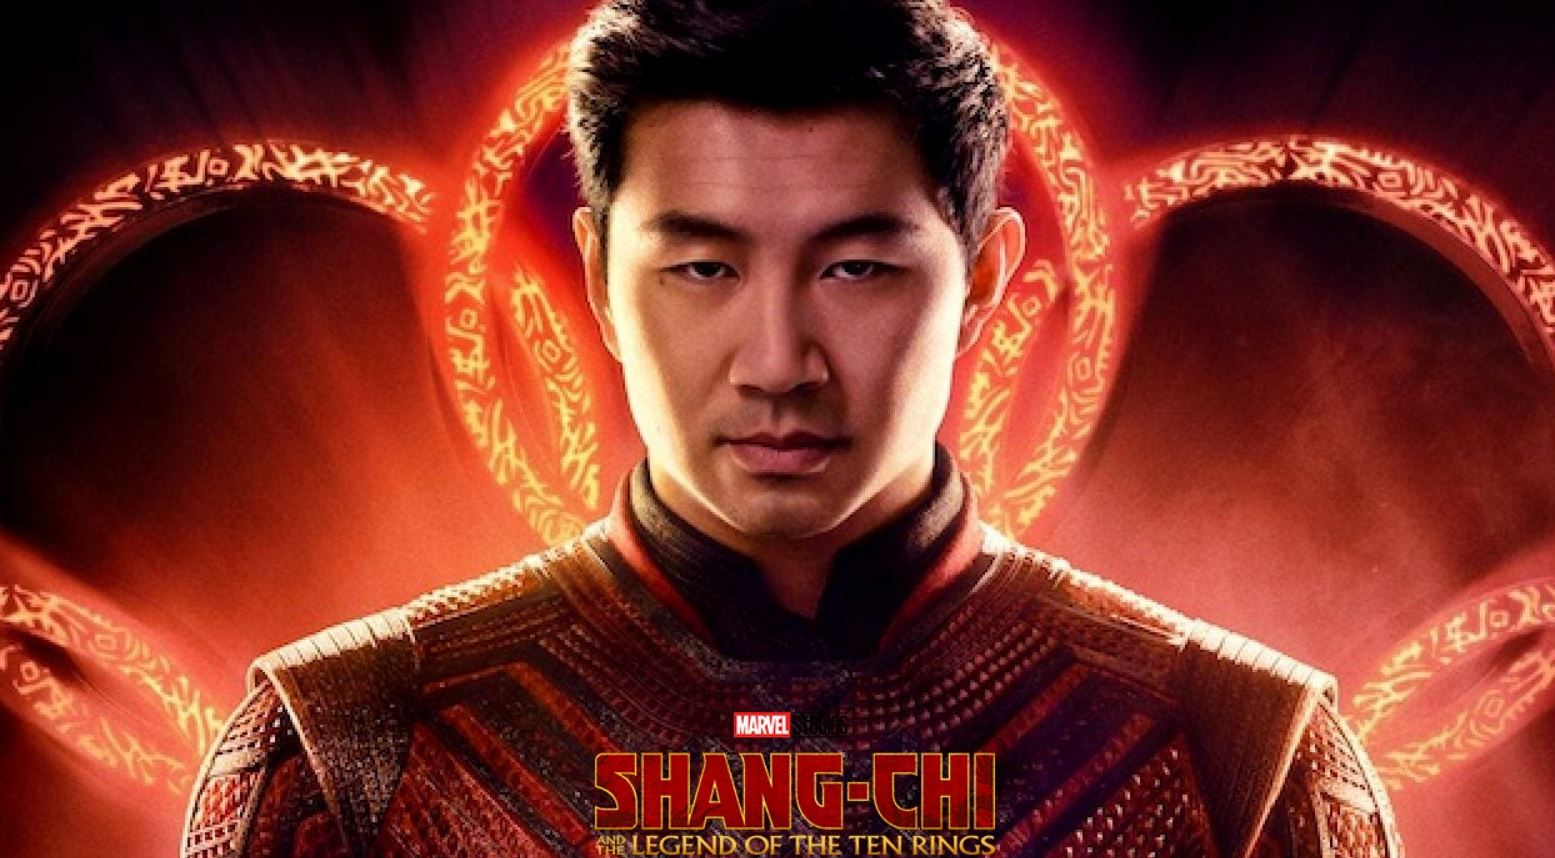 Watch shang chi online